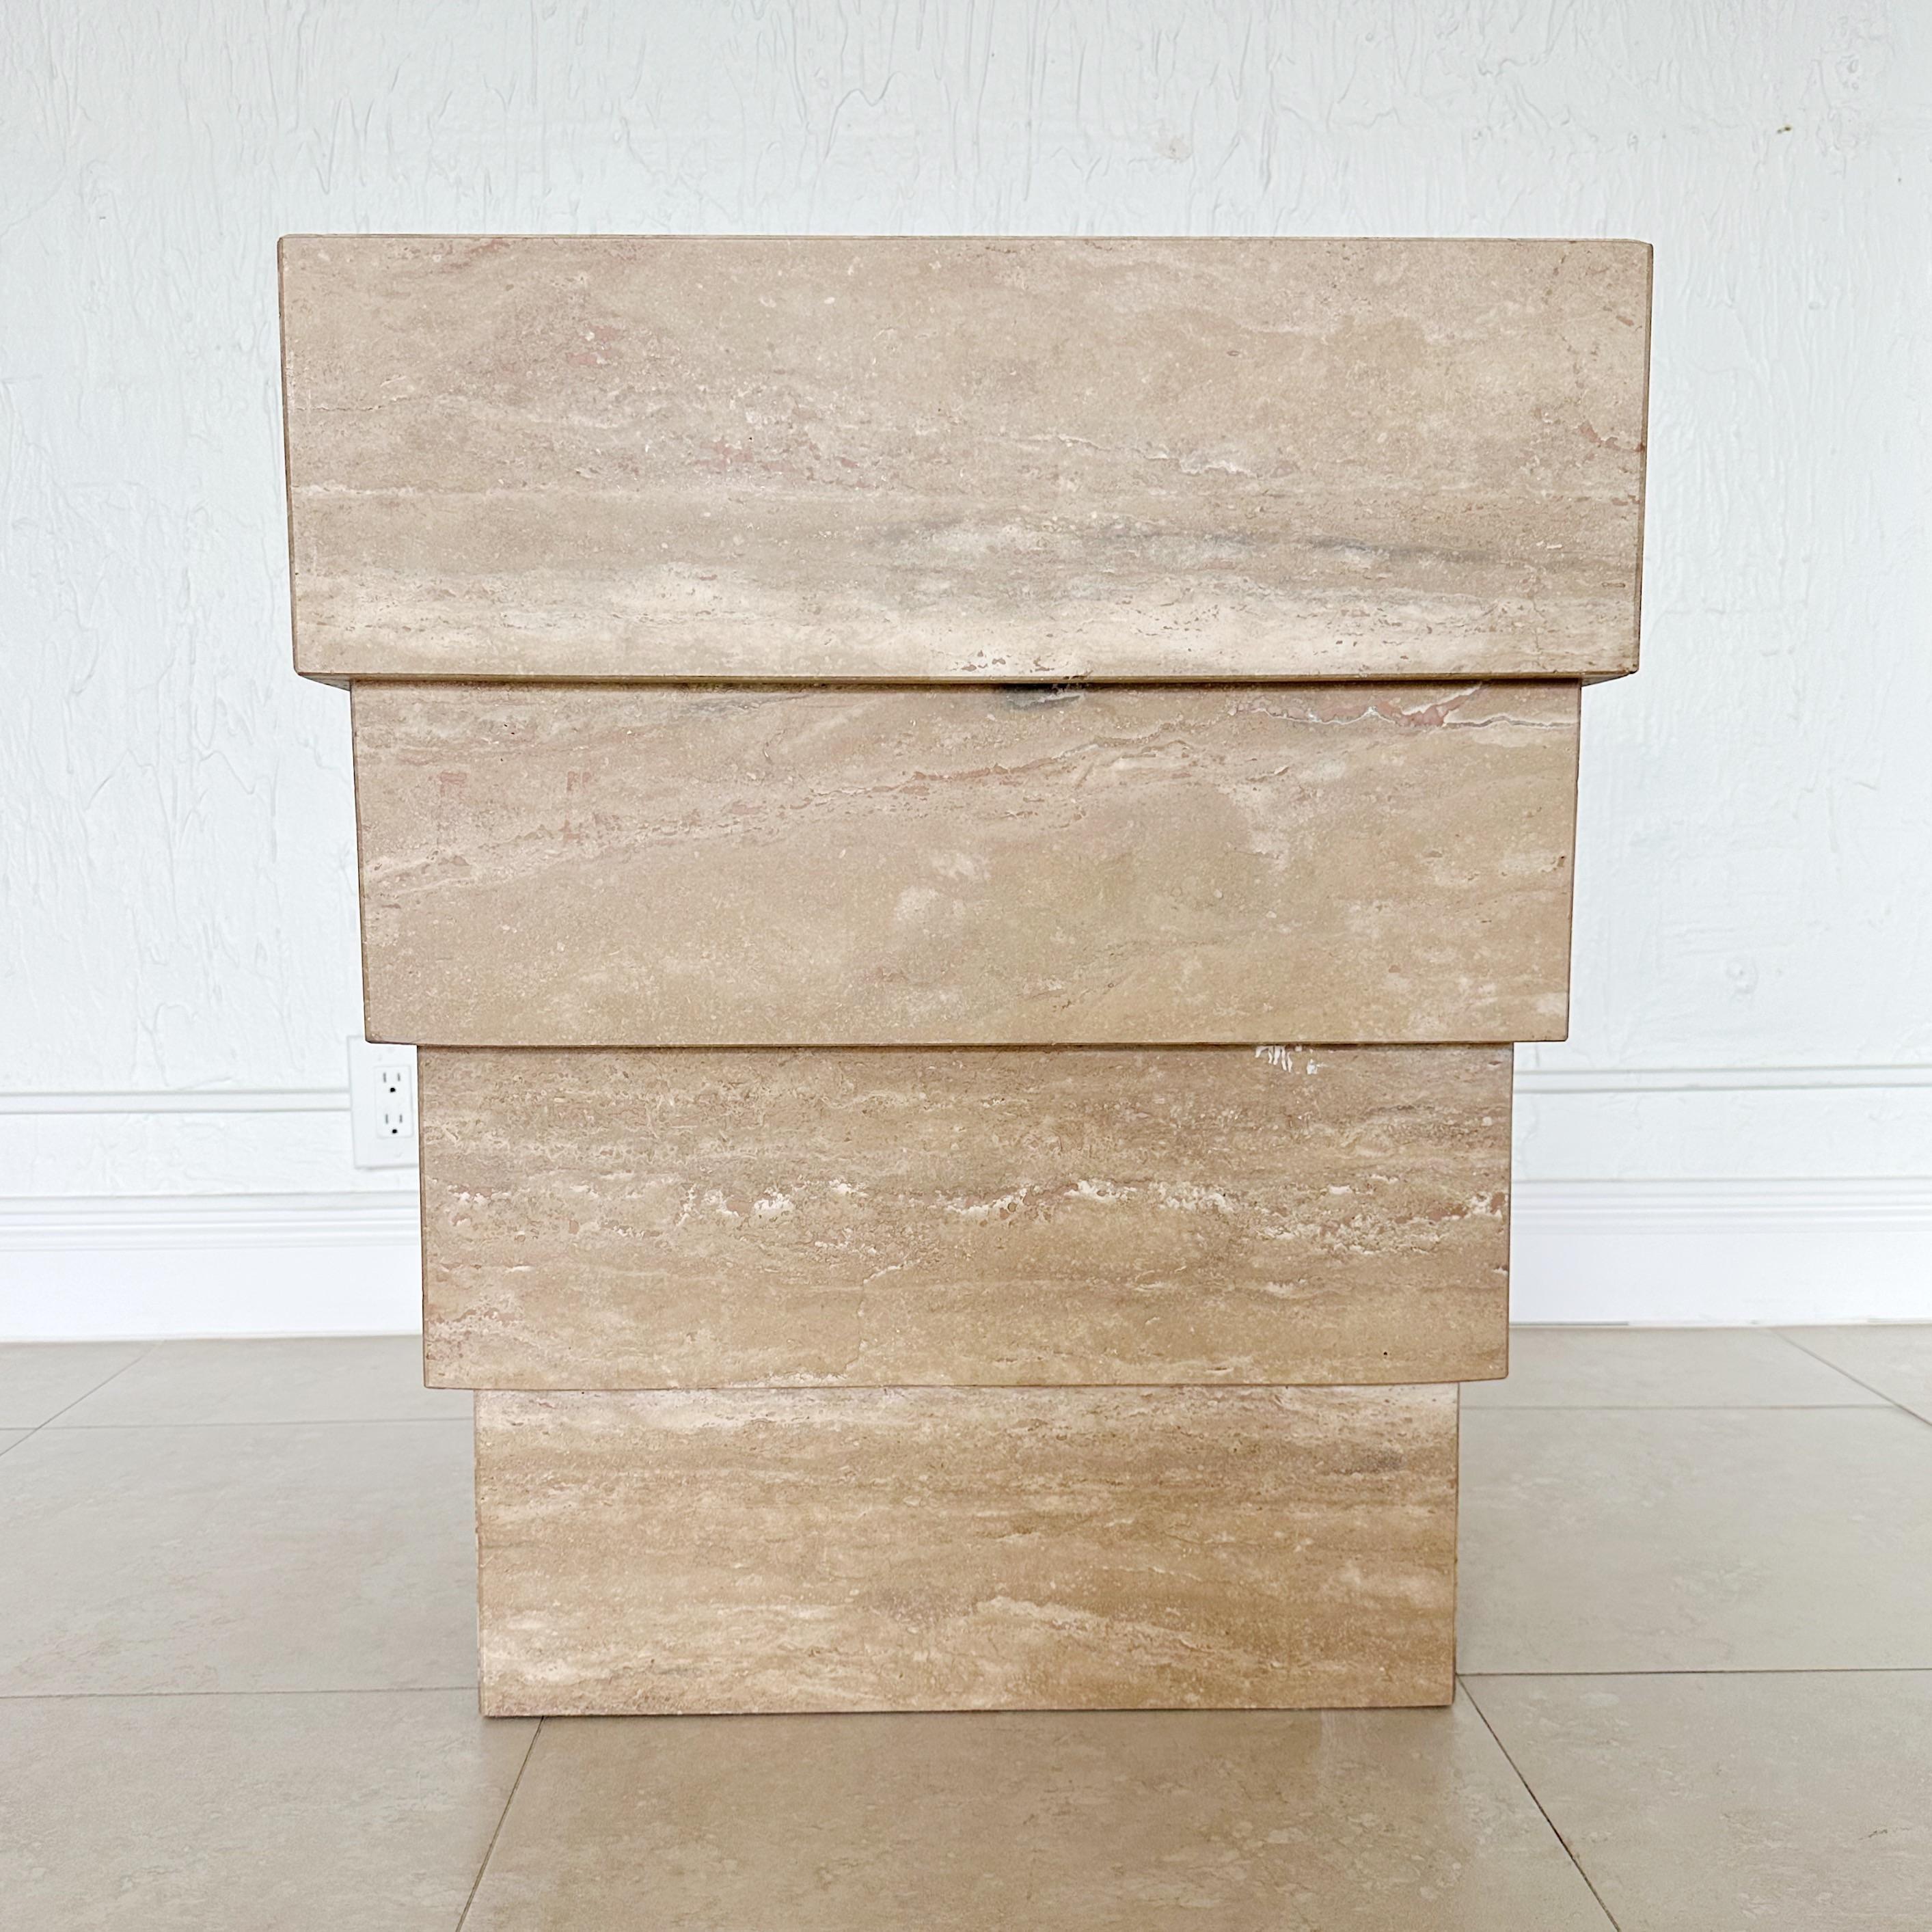 Honed travertine marble dining table base or could be used as a pedestal or console. Made from natural travertine in stepped, stacked form. Unsigned.